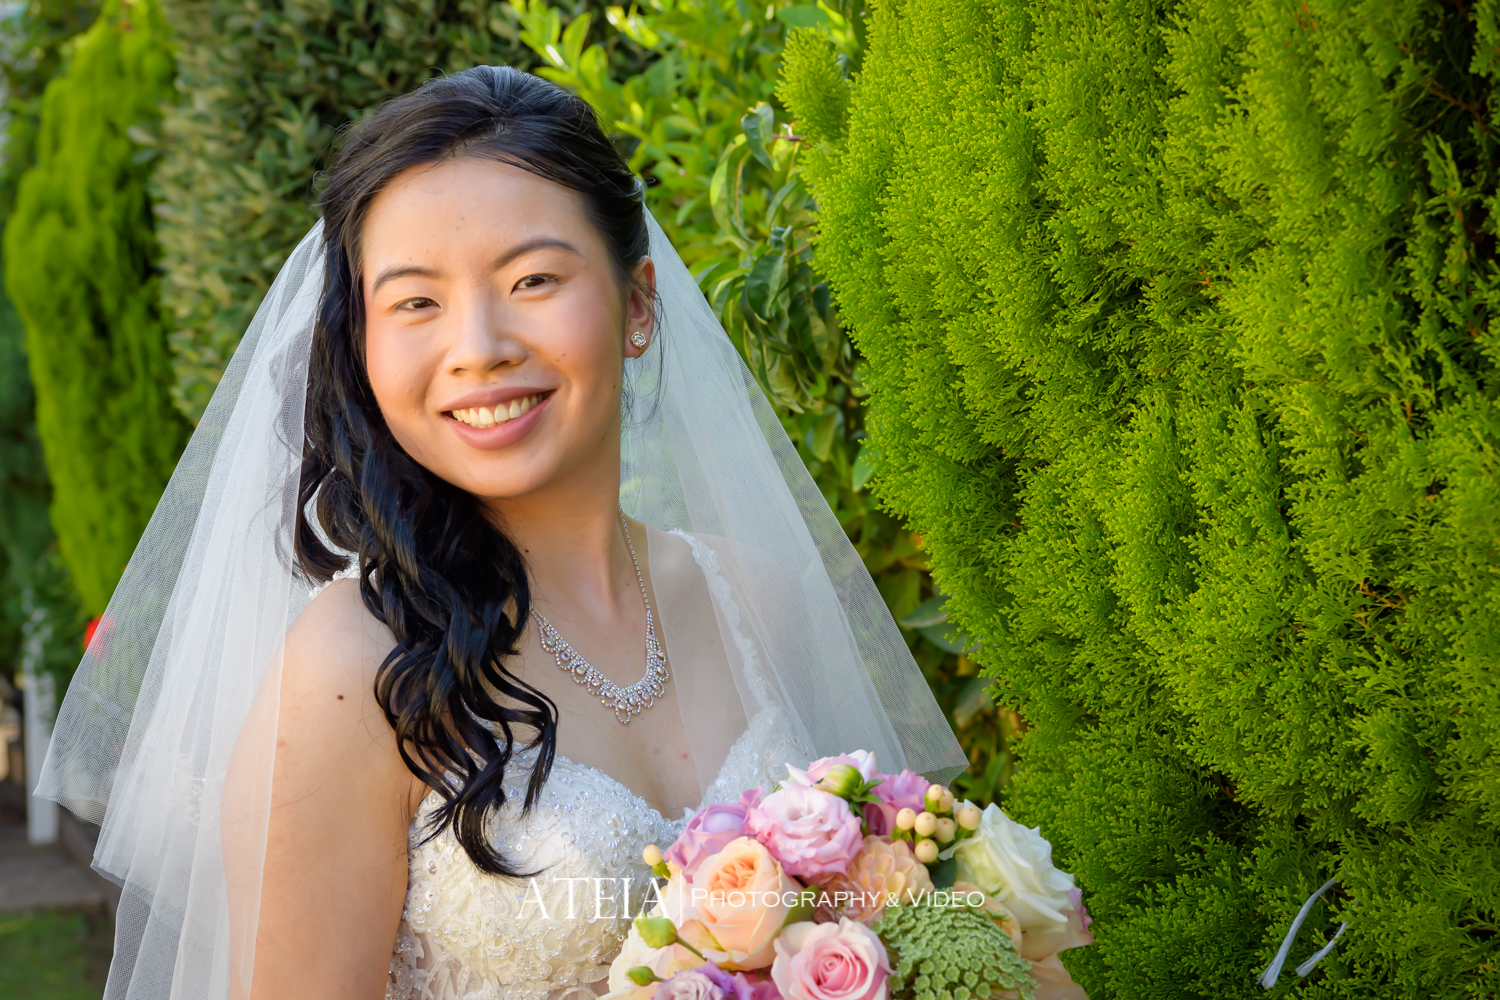 , Ascot House Wedding Photography Melbourne by ATEIA Photography &#038; Video